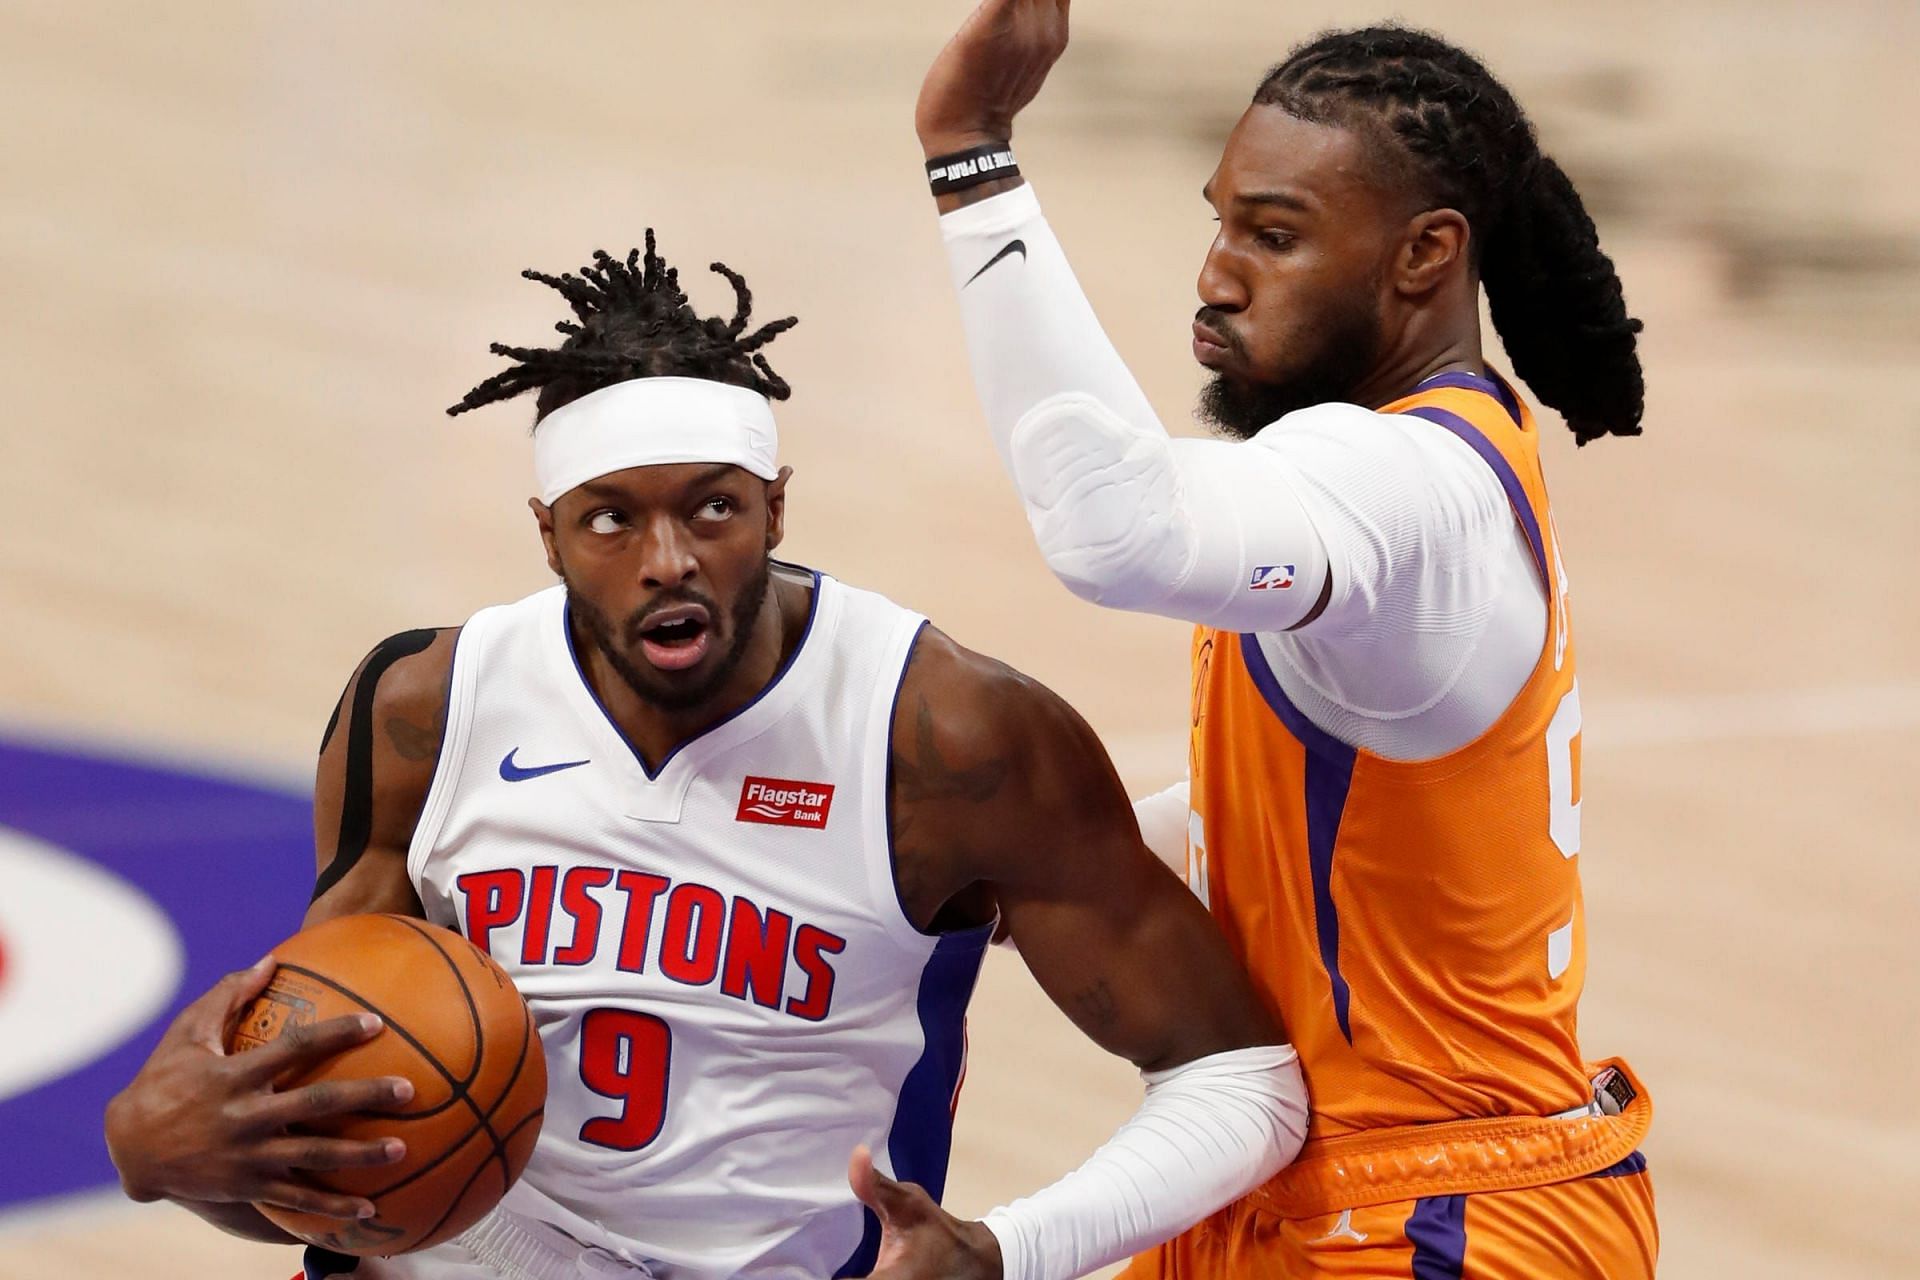 The Phoenix Suns are looking to extend their NBA-best 17-game winning run against the slumping Detroit Pistons on Thursday. [Photo: Detroit Free Press]